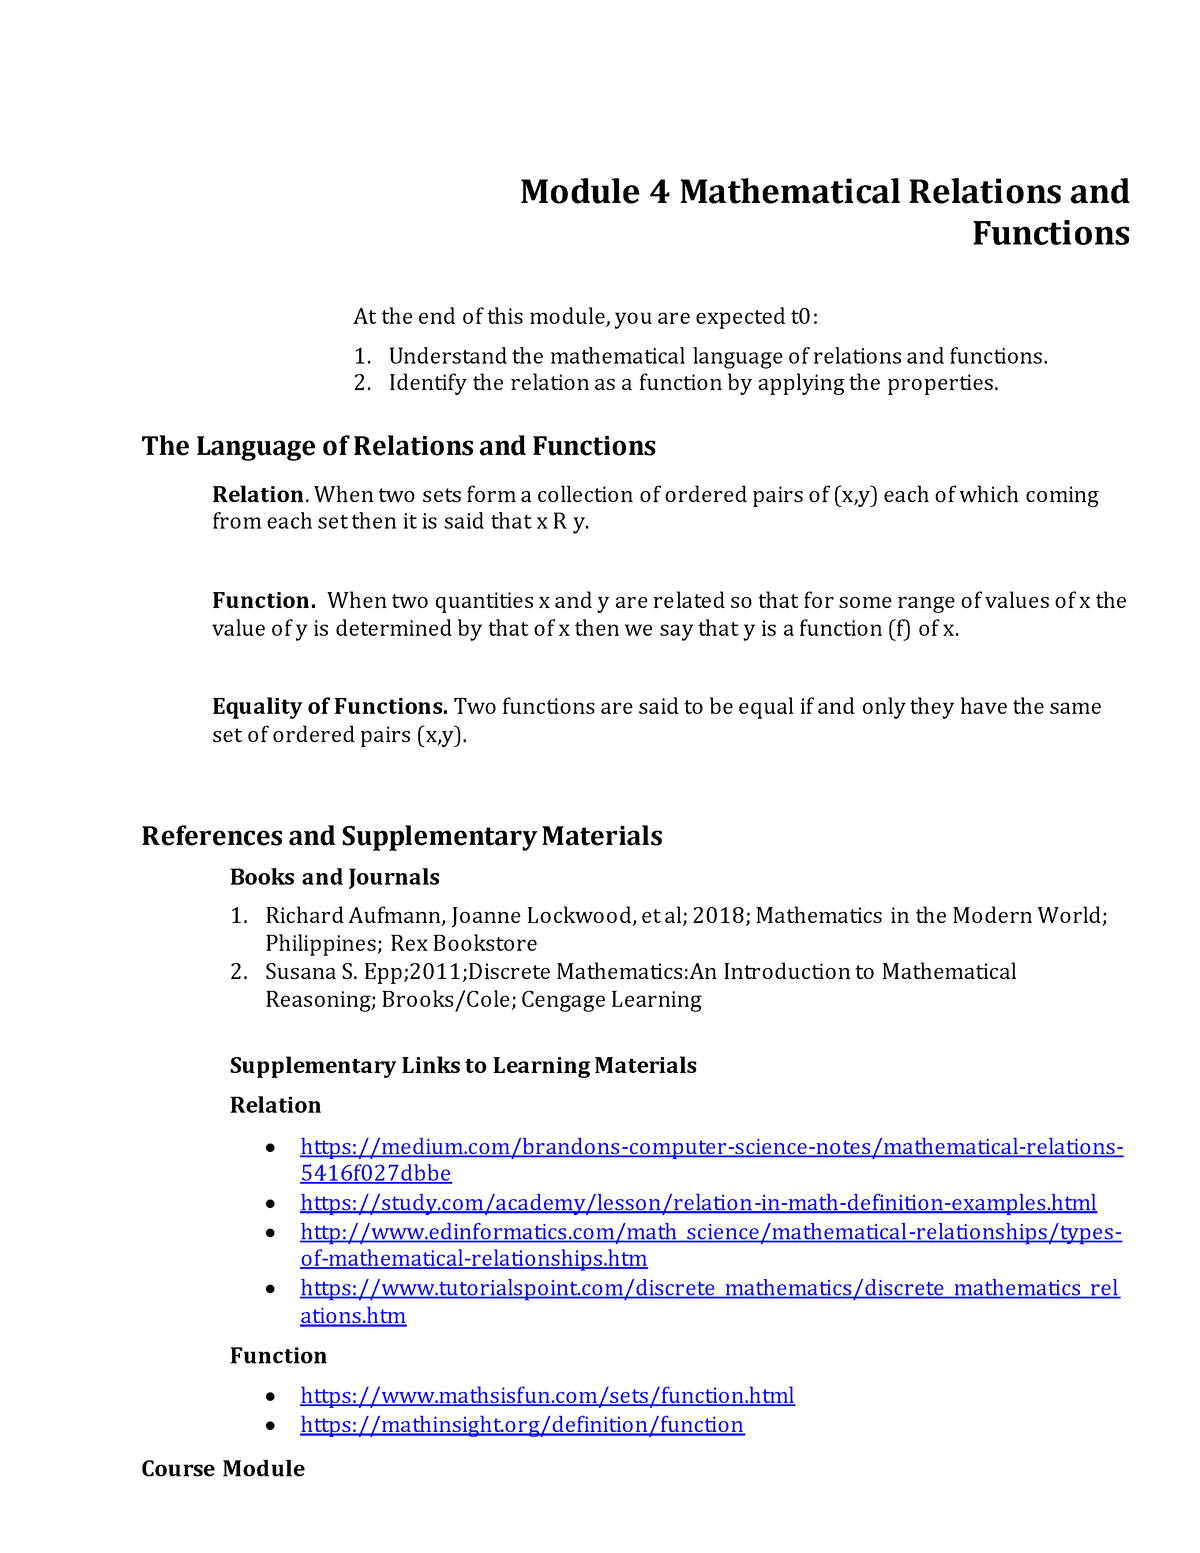 W4 Module 004 Mathematical Relations And Functions Course Module Module 4 Mathematical 7184